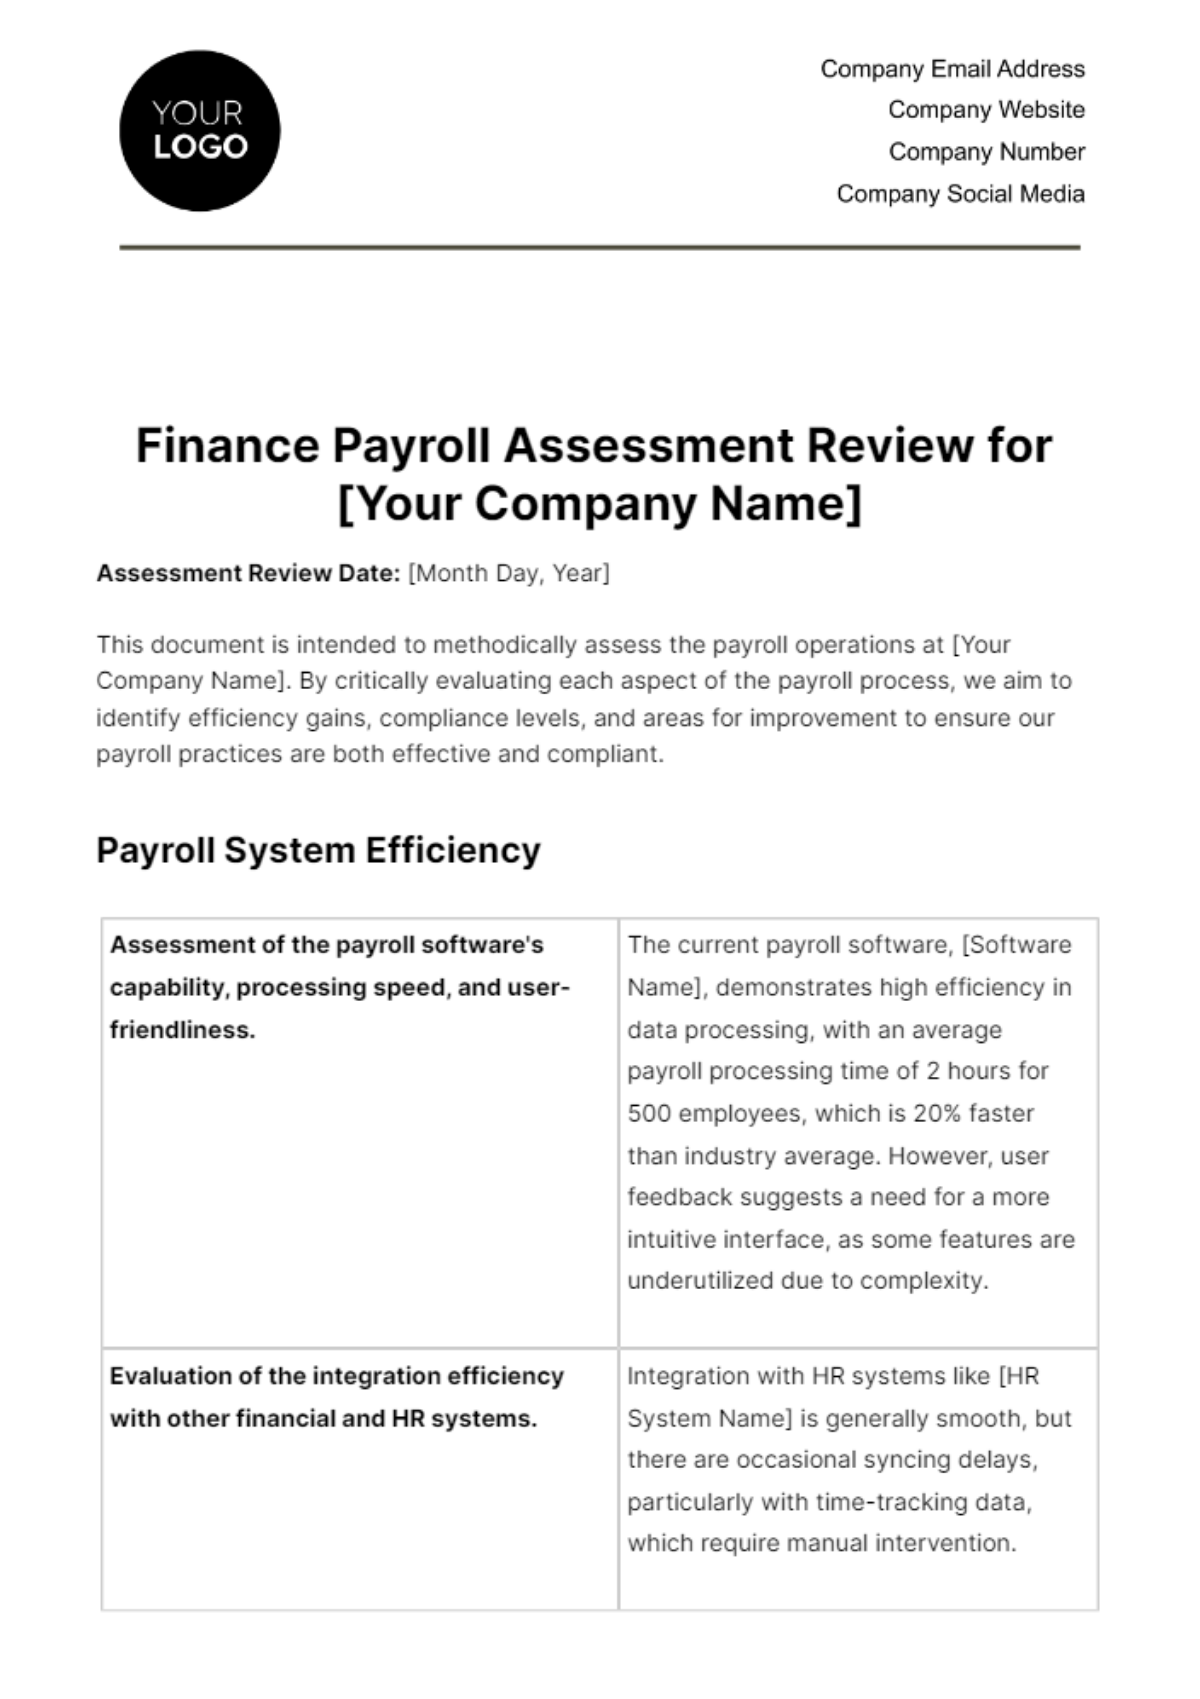 Free Finance Payroll Assessment Review Template